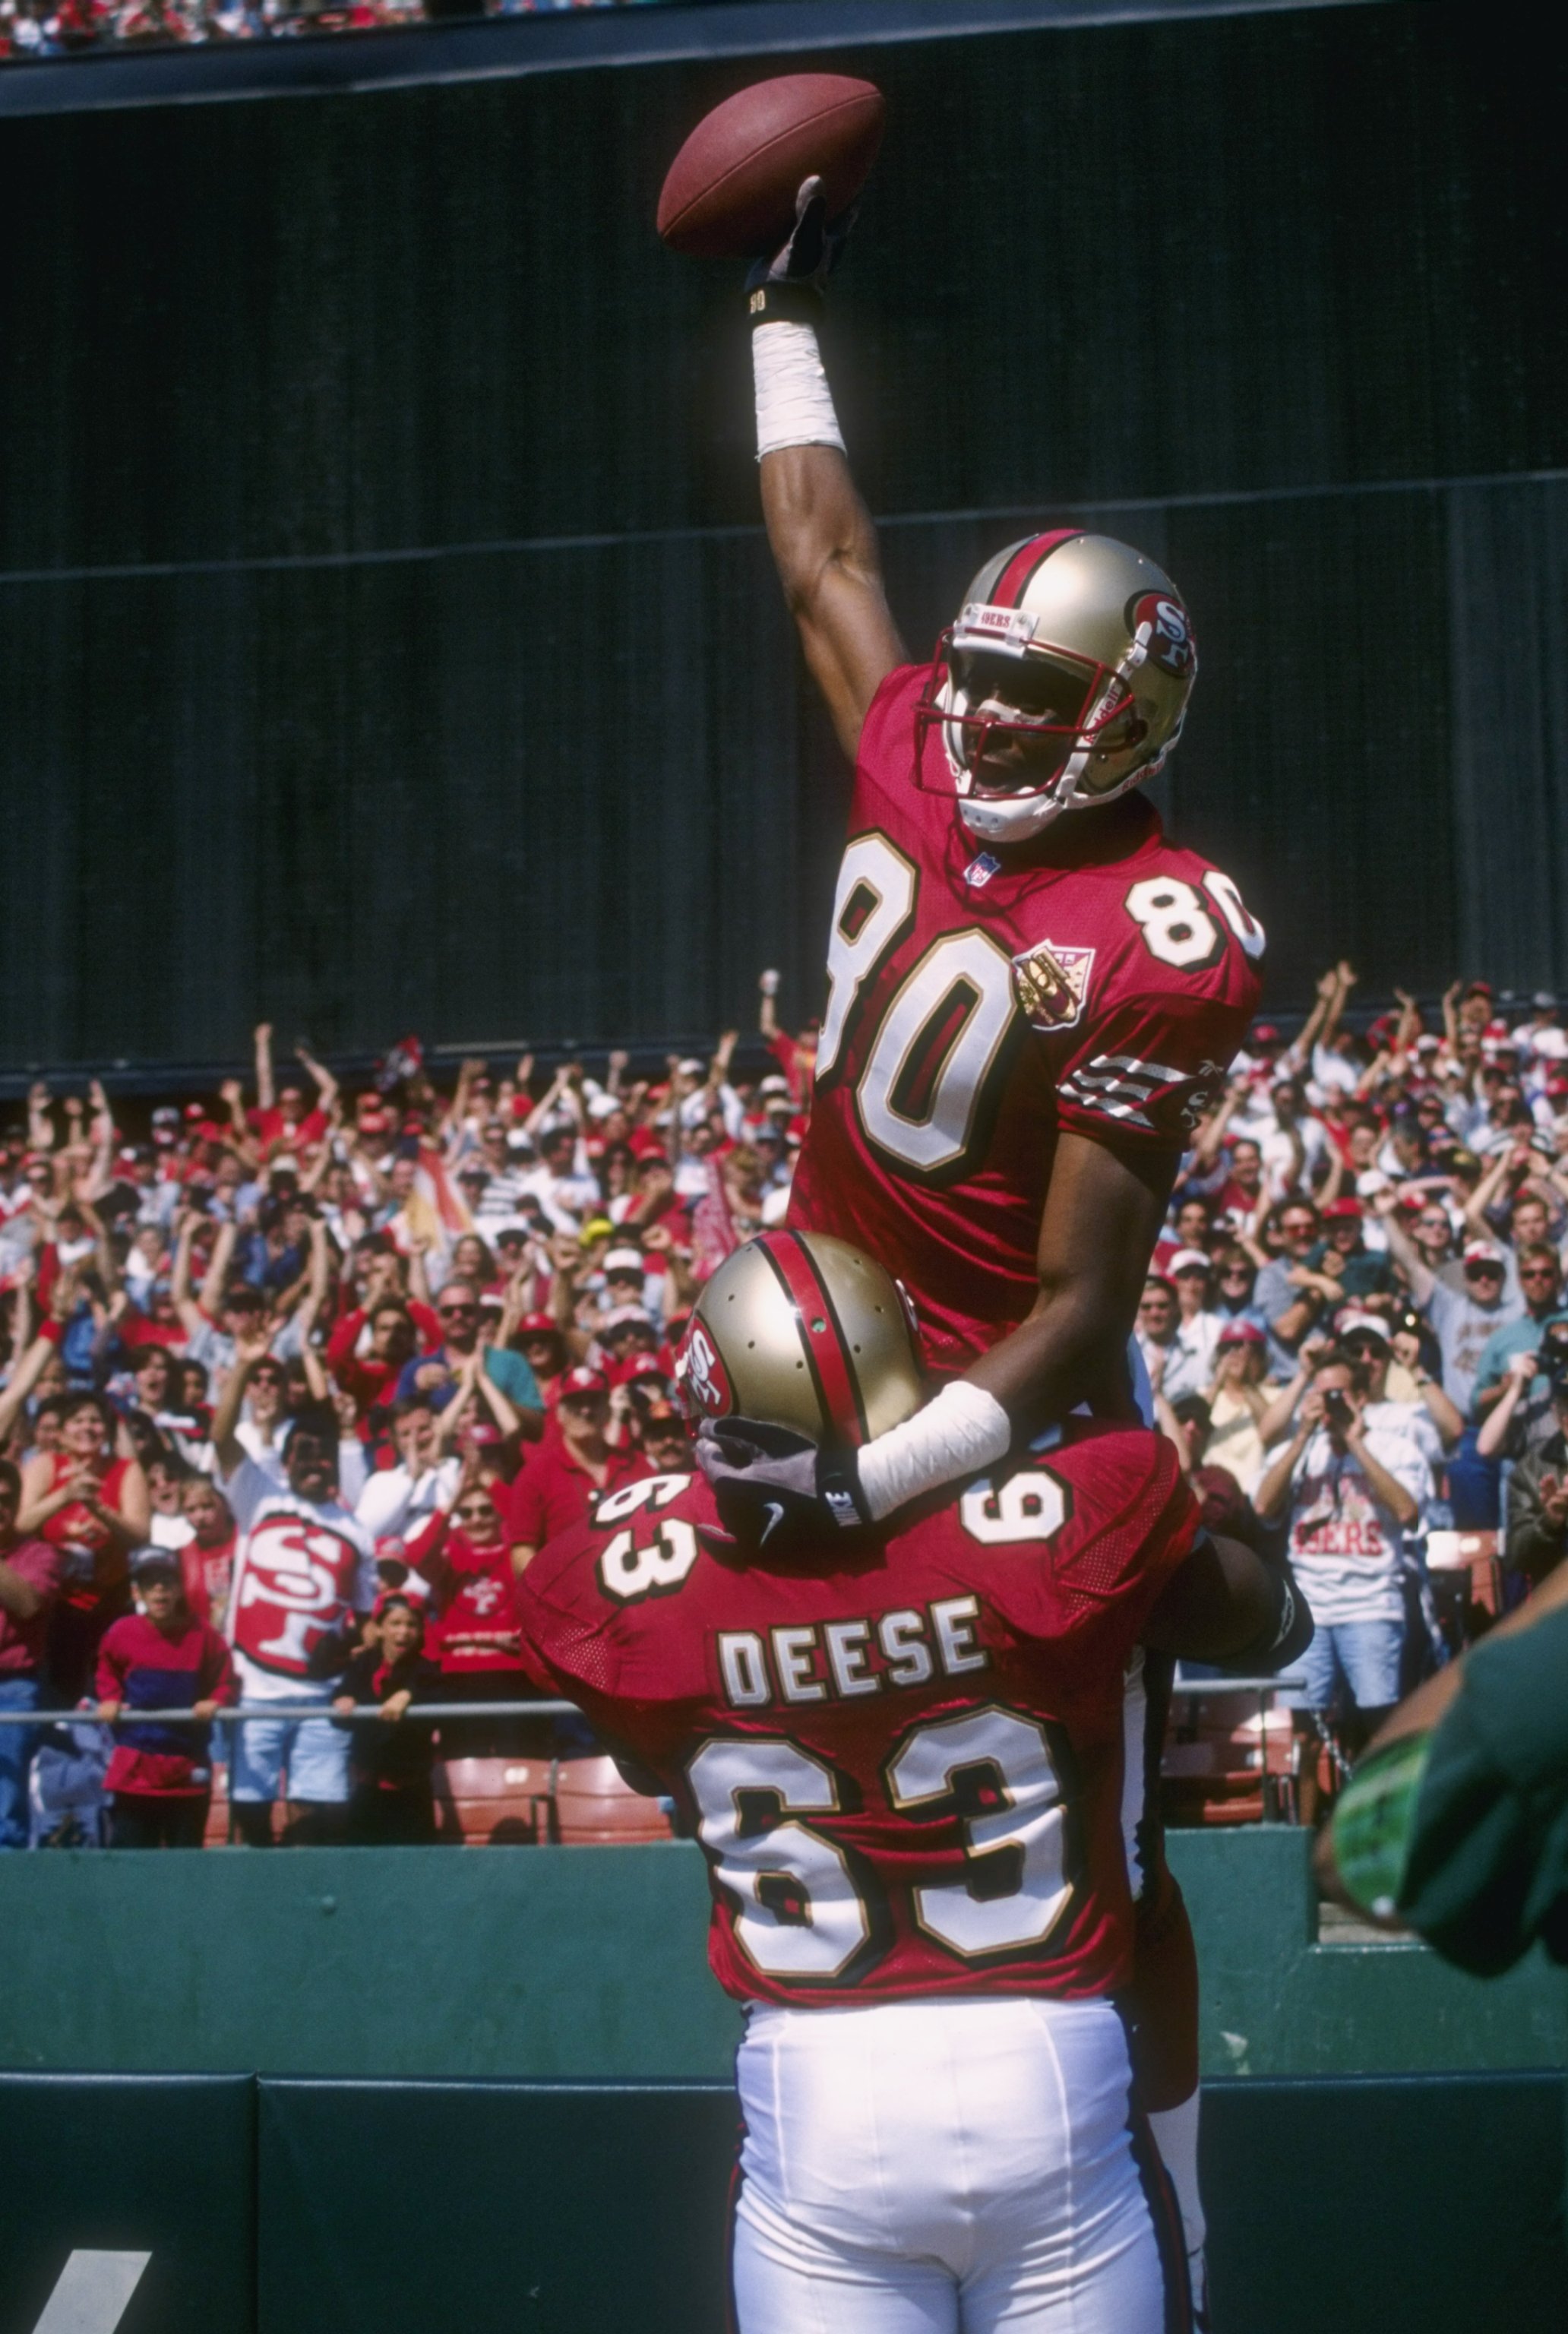 Best wide receiver ever: Jerry Rice vs. Randy Moss - Yahoo Sports